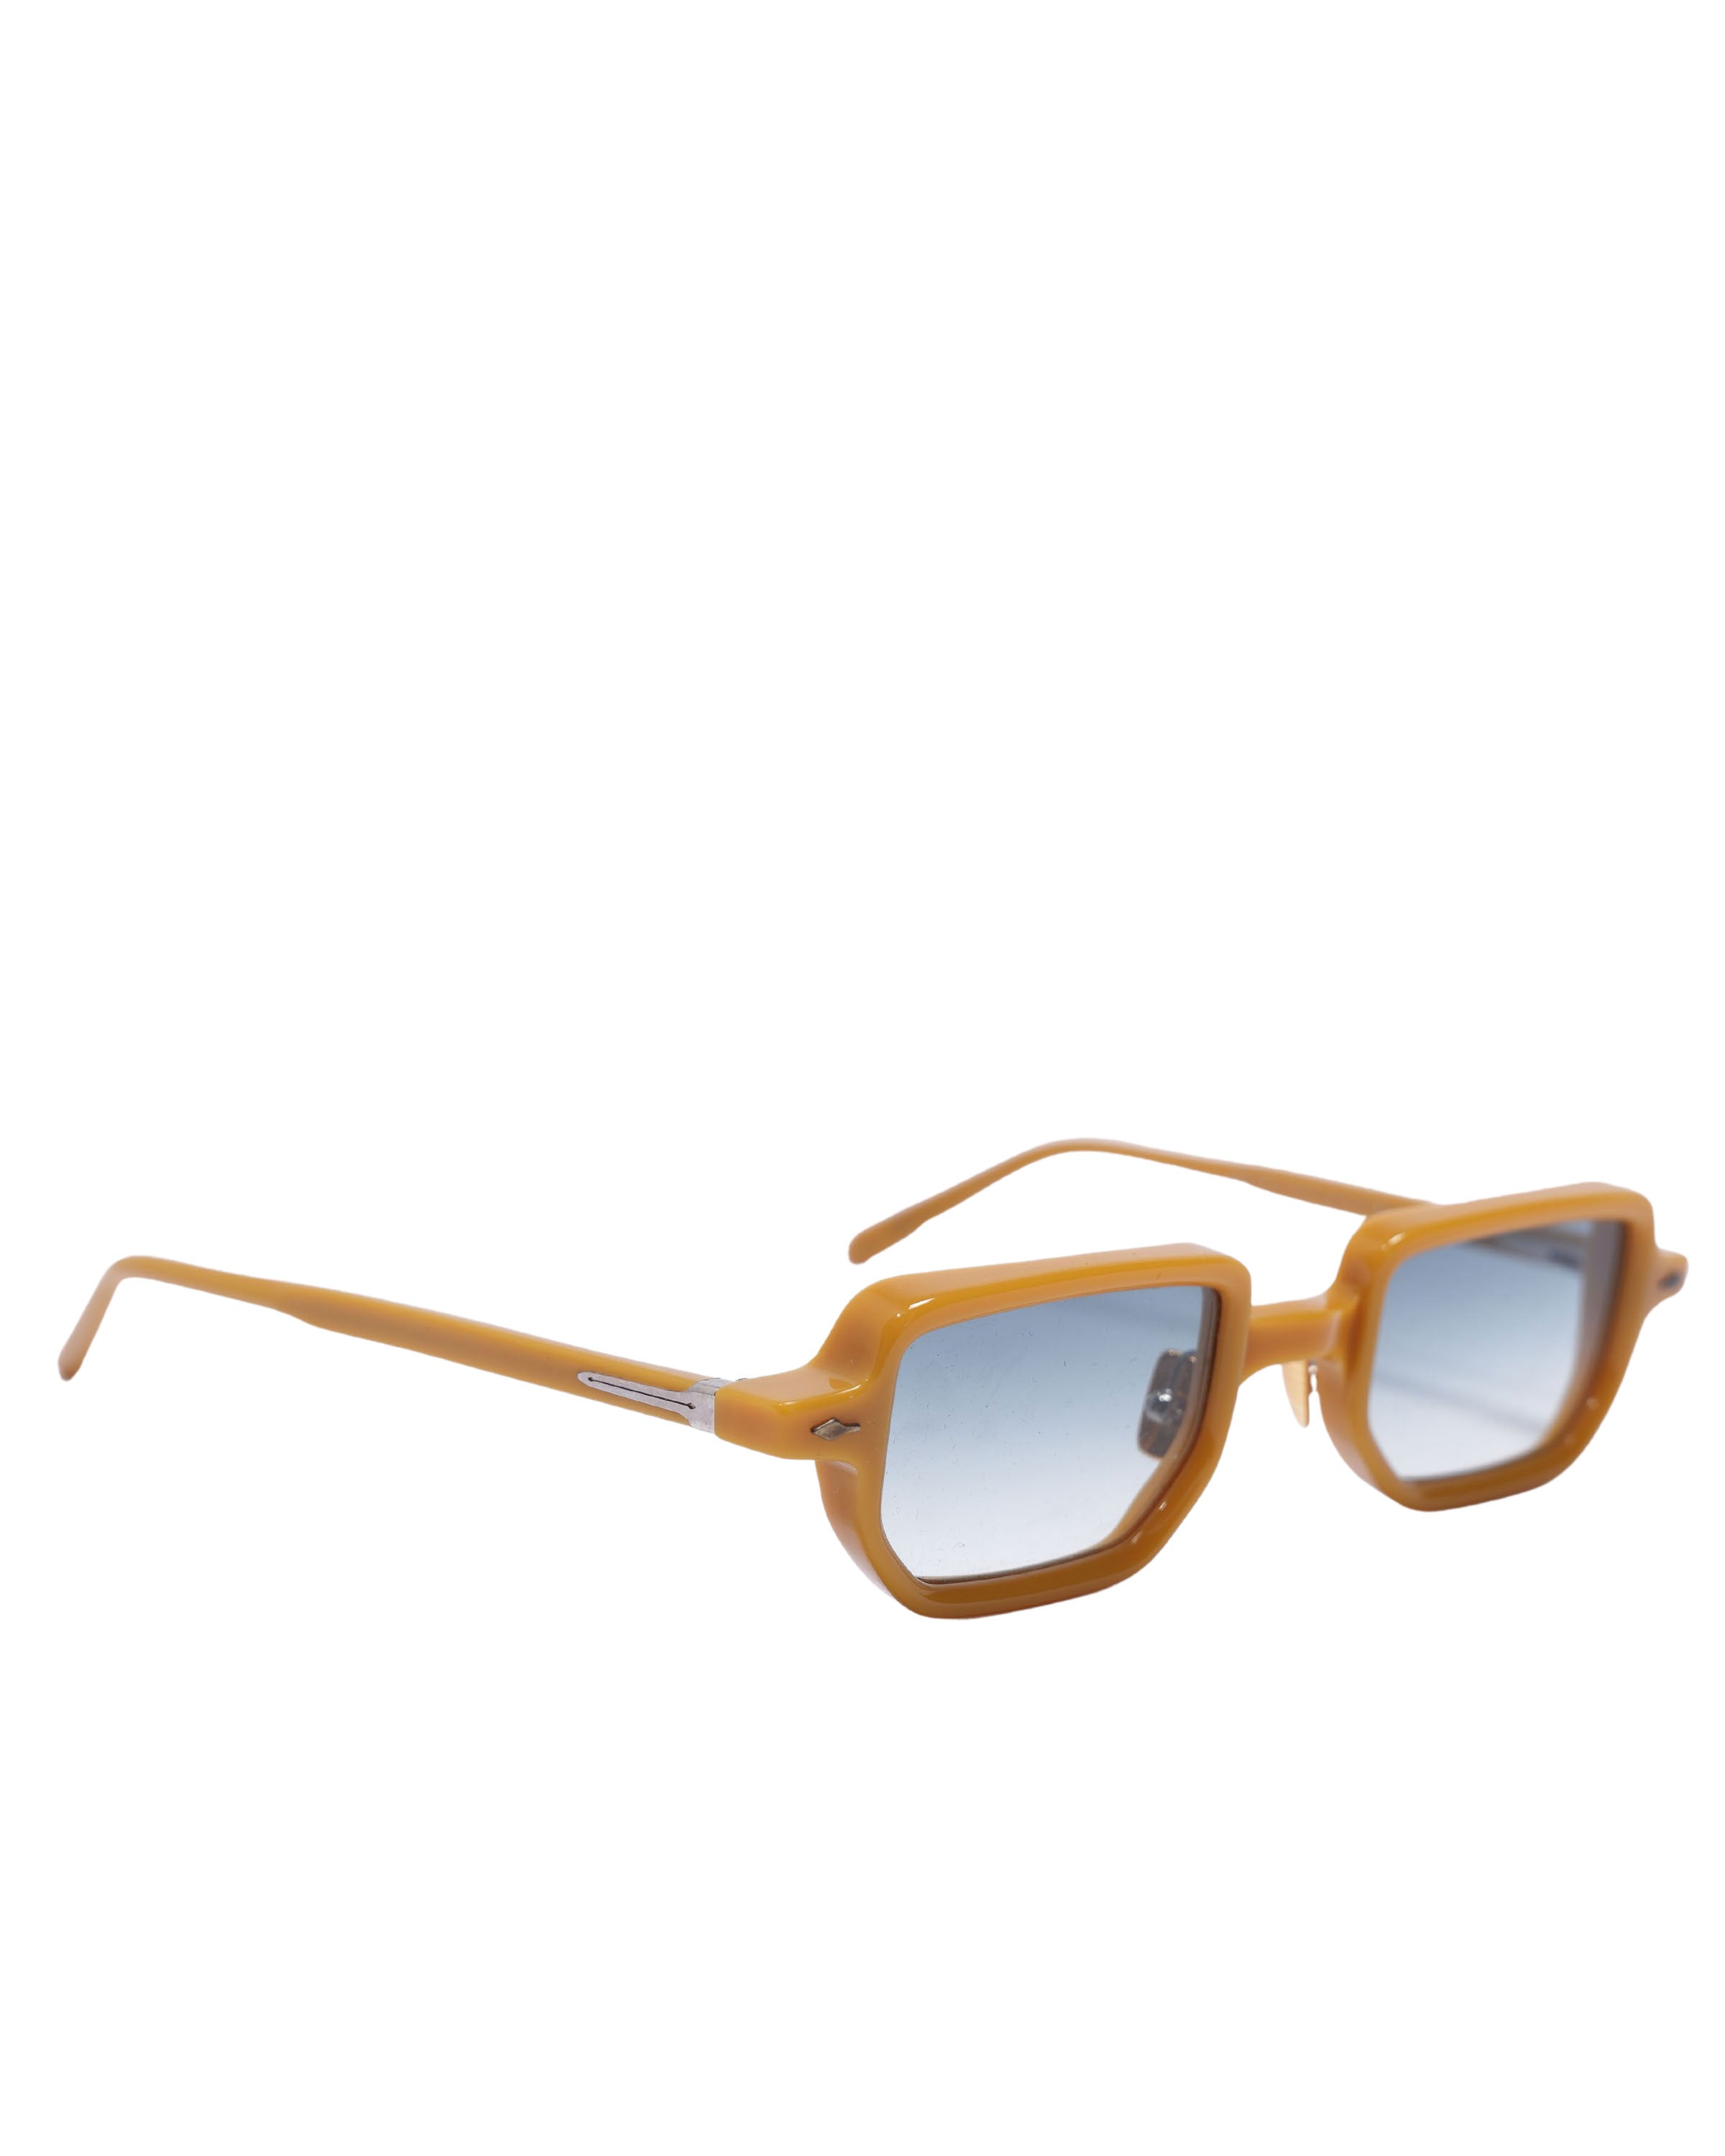 Astaire Sunglasses